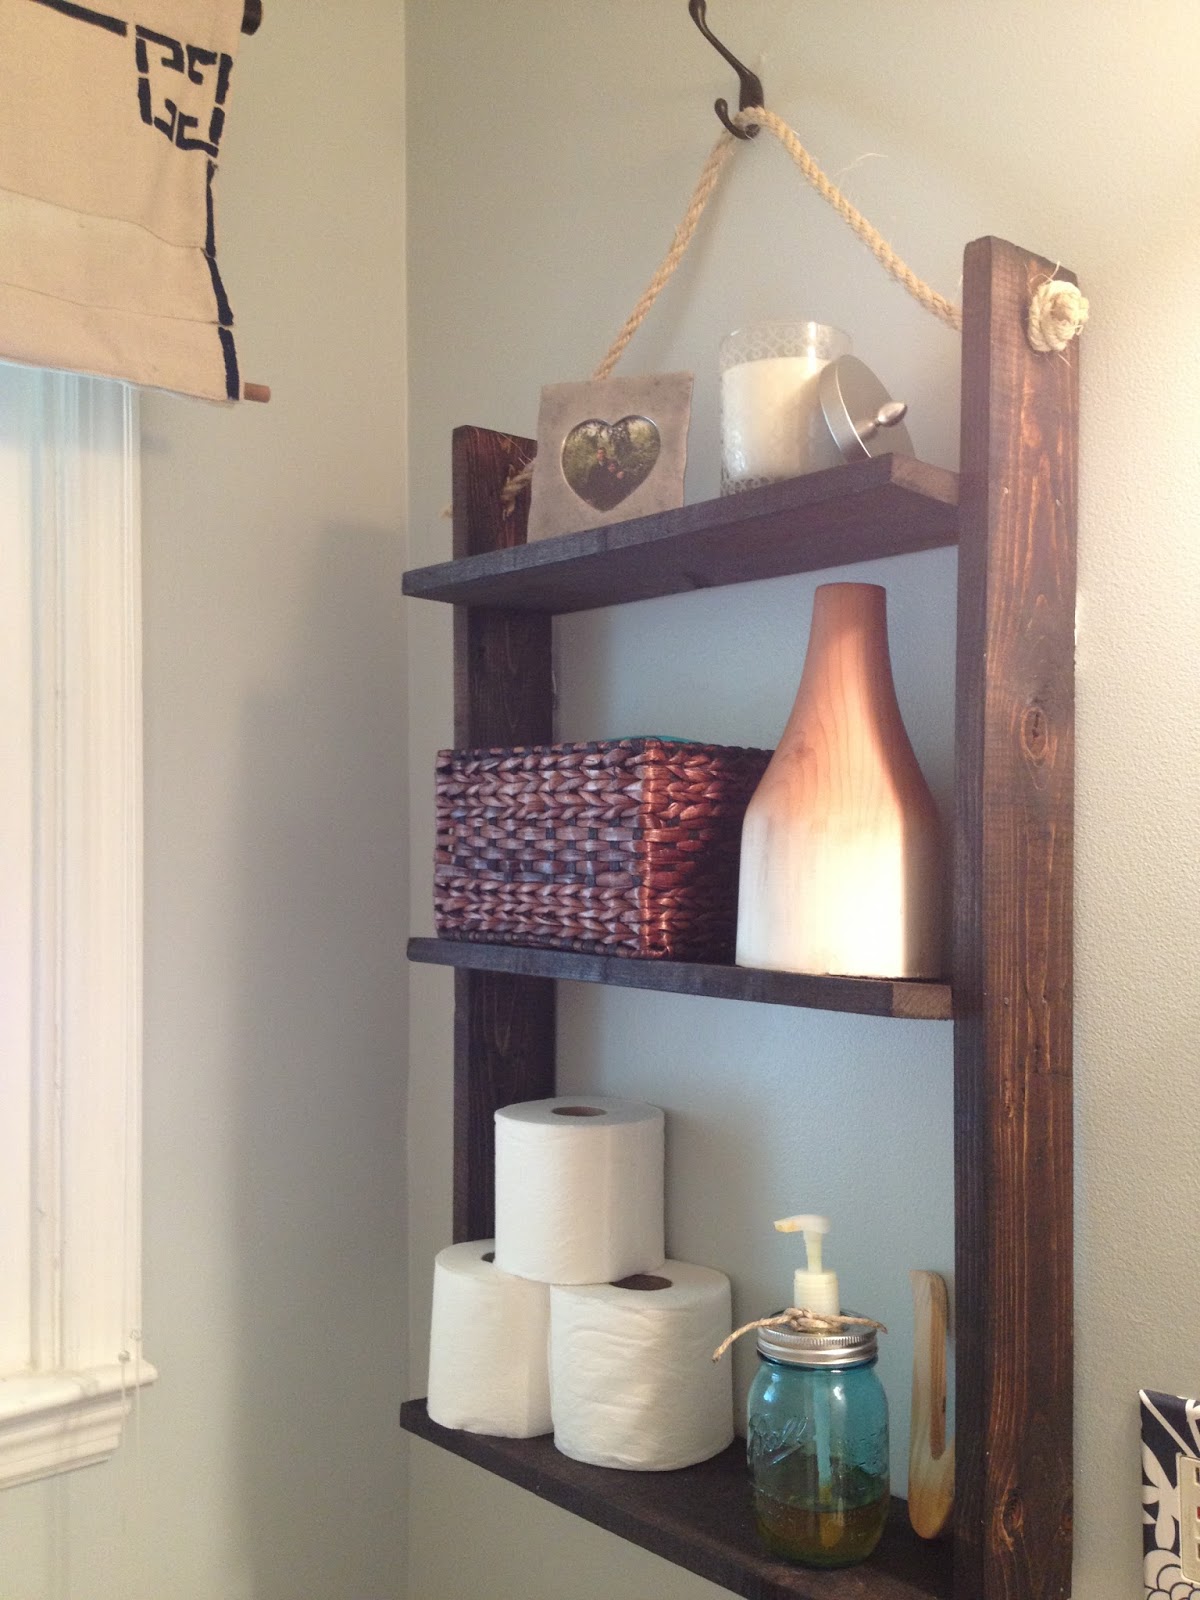 How to make a Hanging Bathroom Shelf for only $10! - Shanty 2 Chic